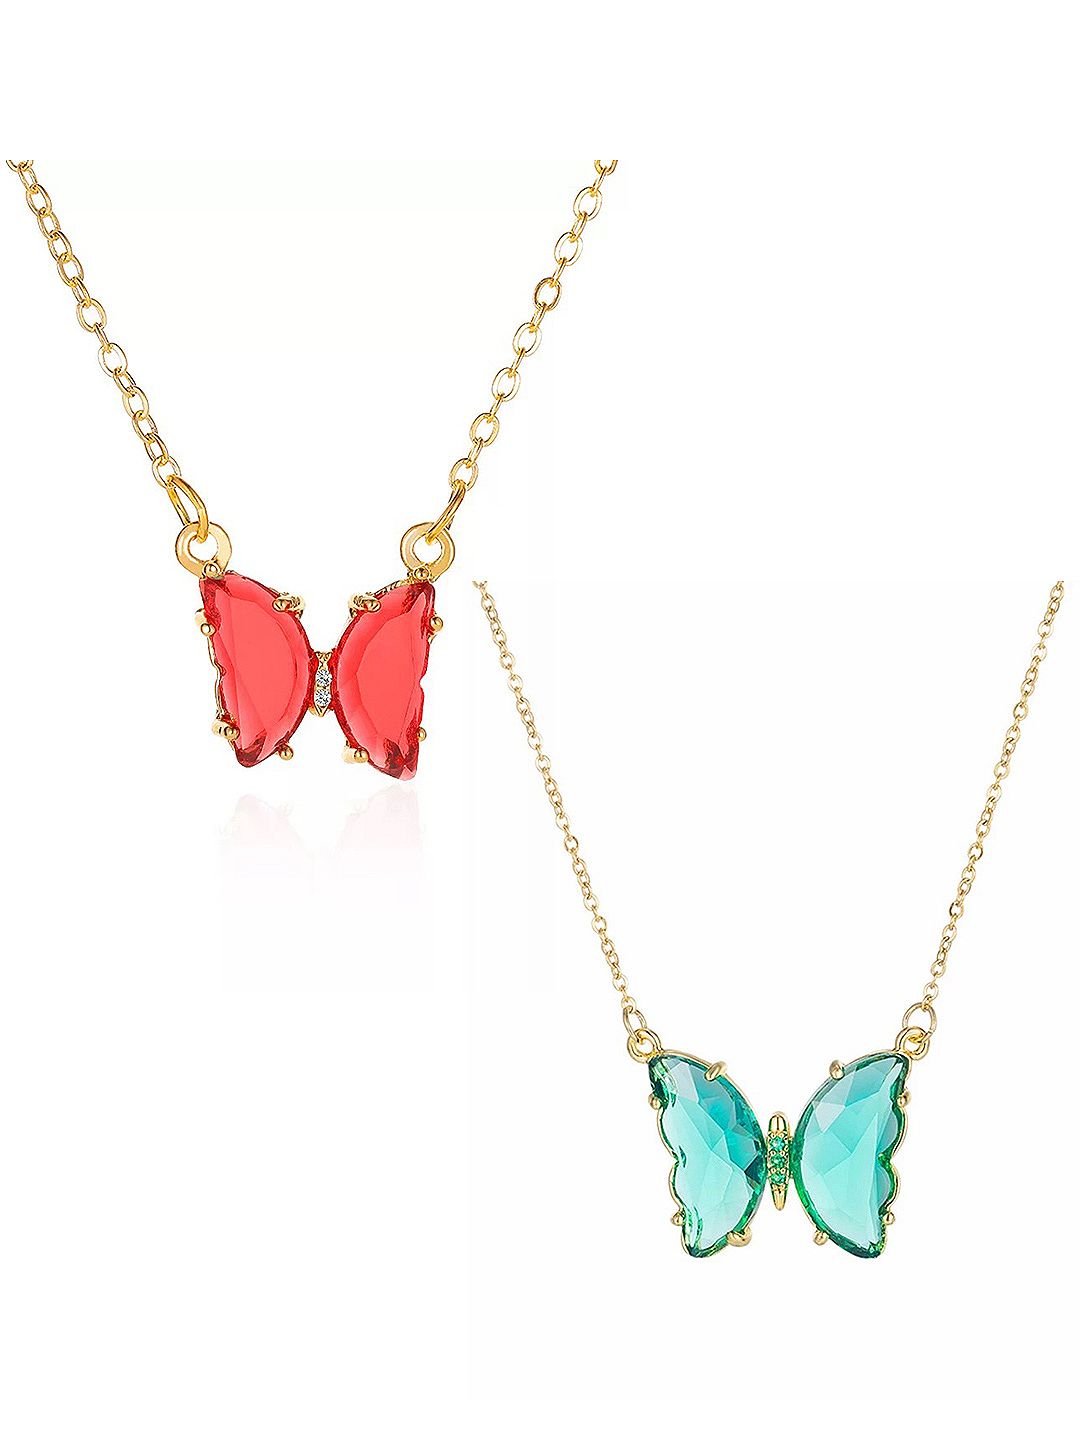 Vembley Set Of 2 Red & Blue Gold-Plated Necklaces Price in India